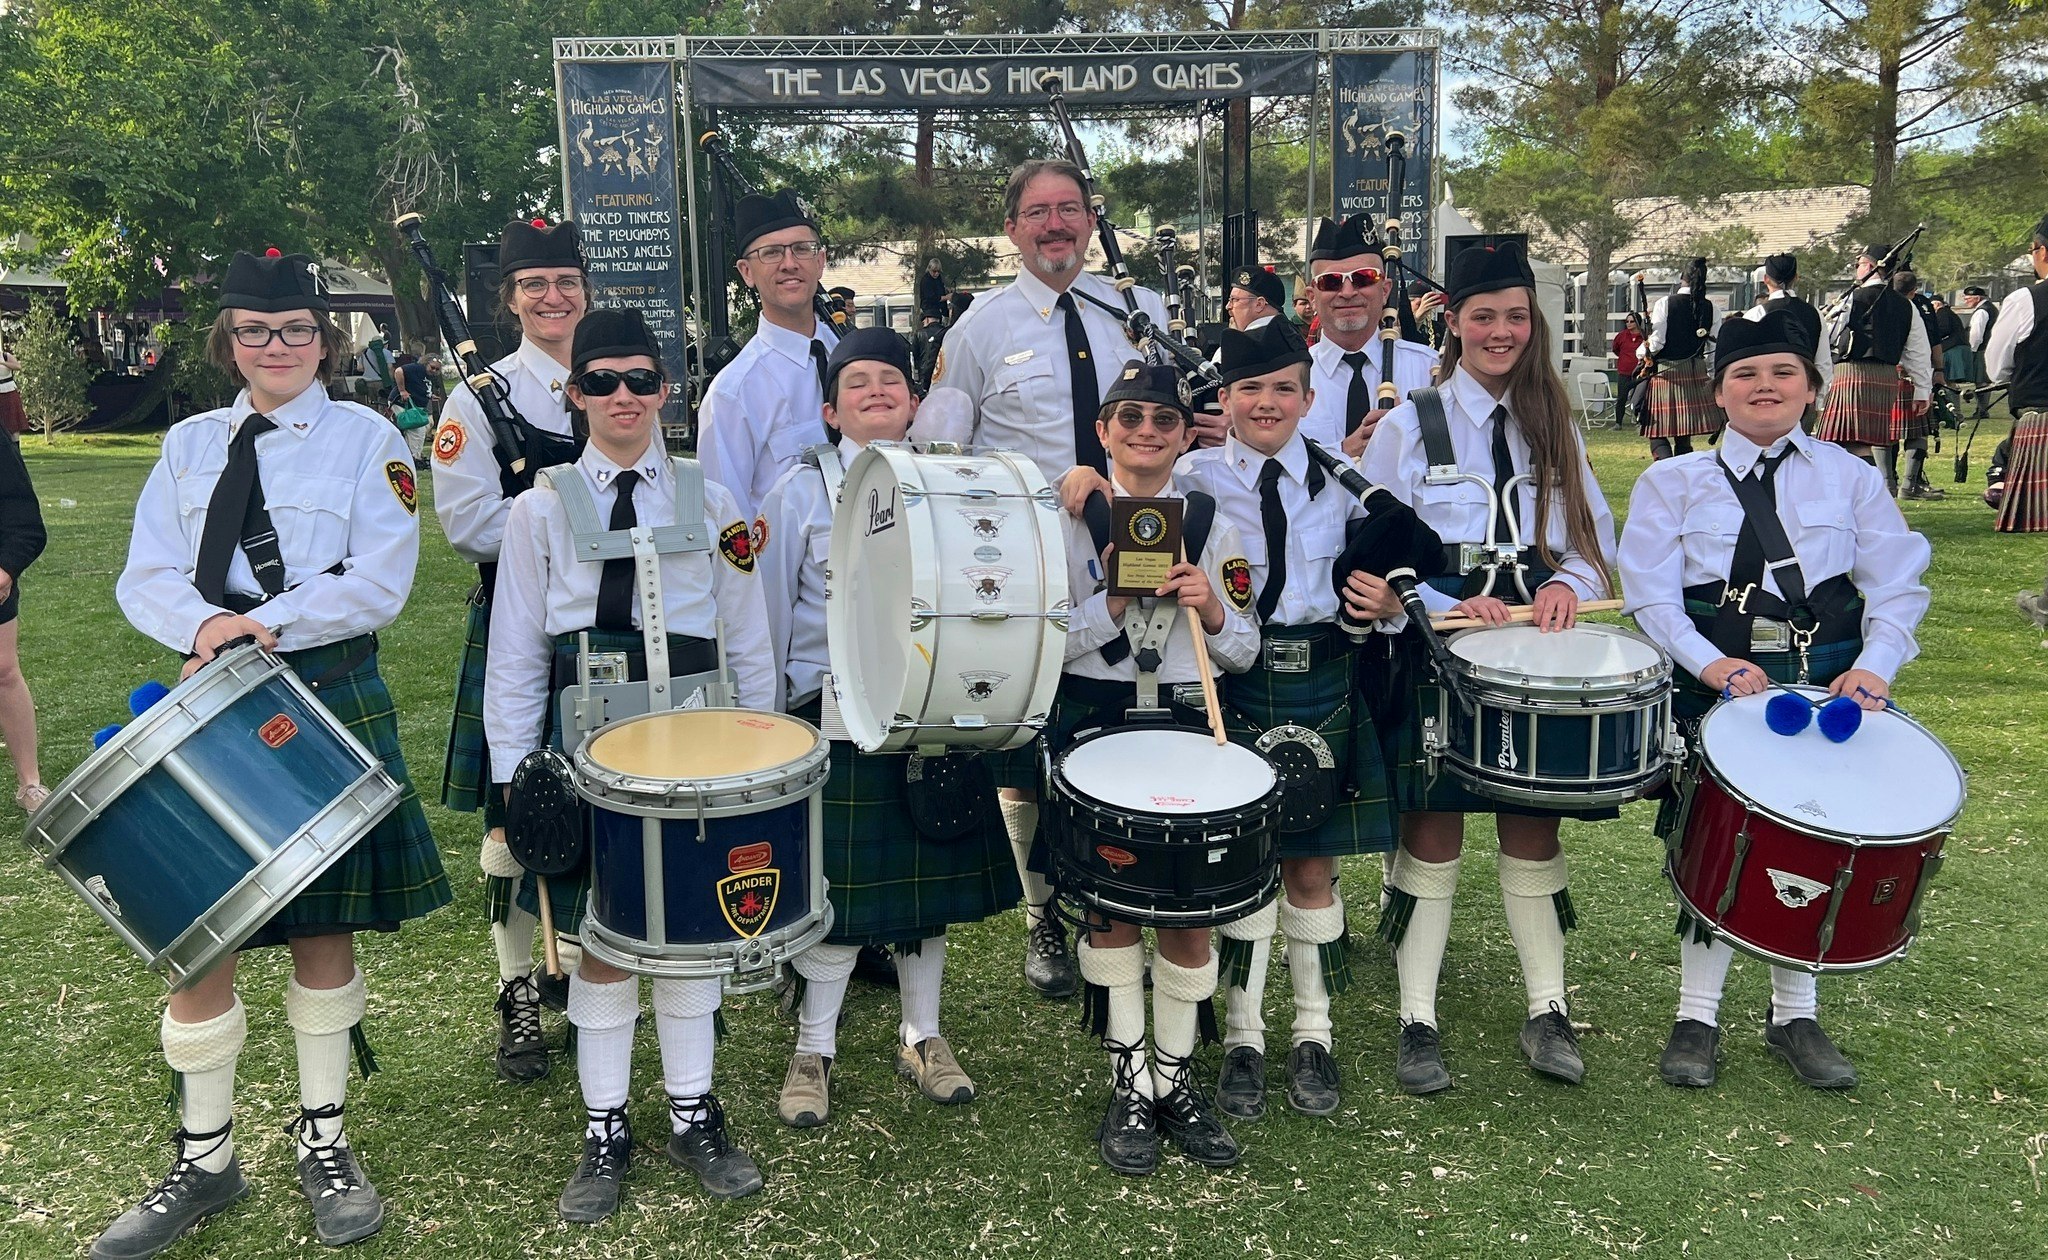 This is a recent photo of the band during its summer tour of the West, which included the Las Vegas Highland Games.